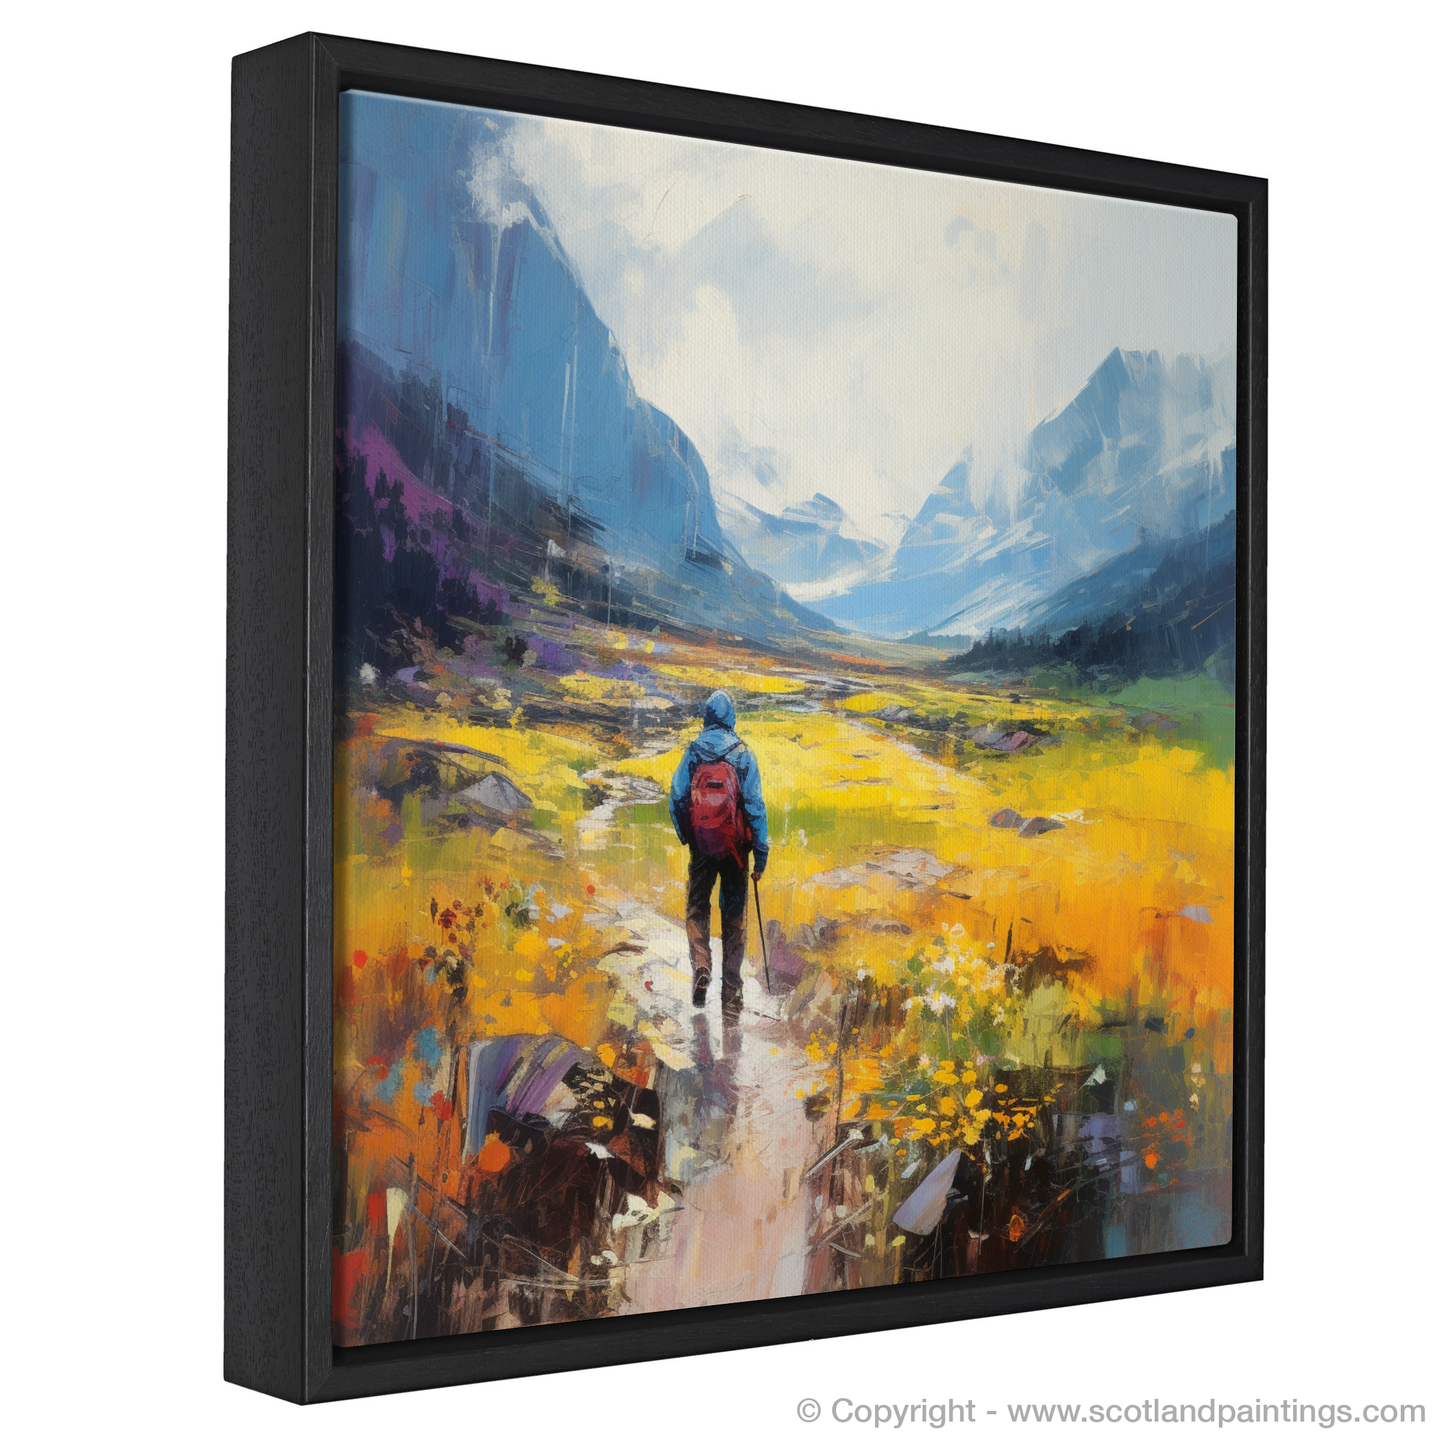 Painting and Art Print of Lone hiker in Glencoe during summer entitled "Solitary Hiker in the Summer Glens of Scotland".